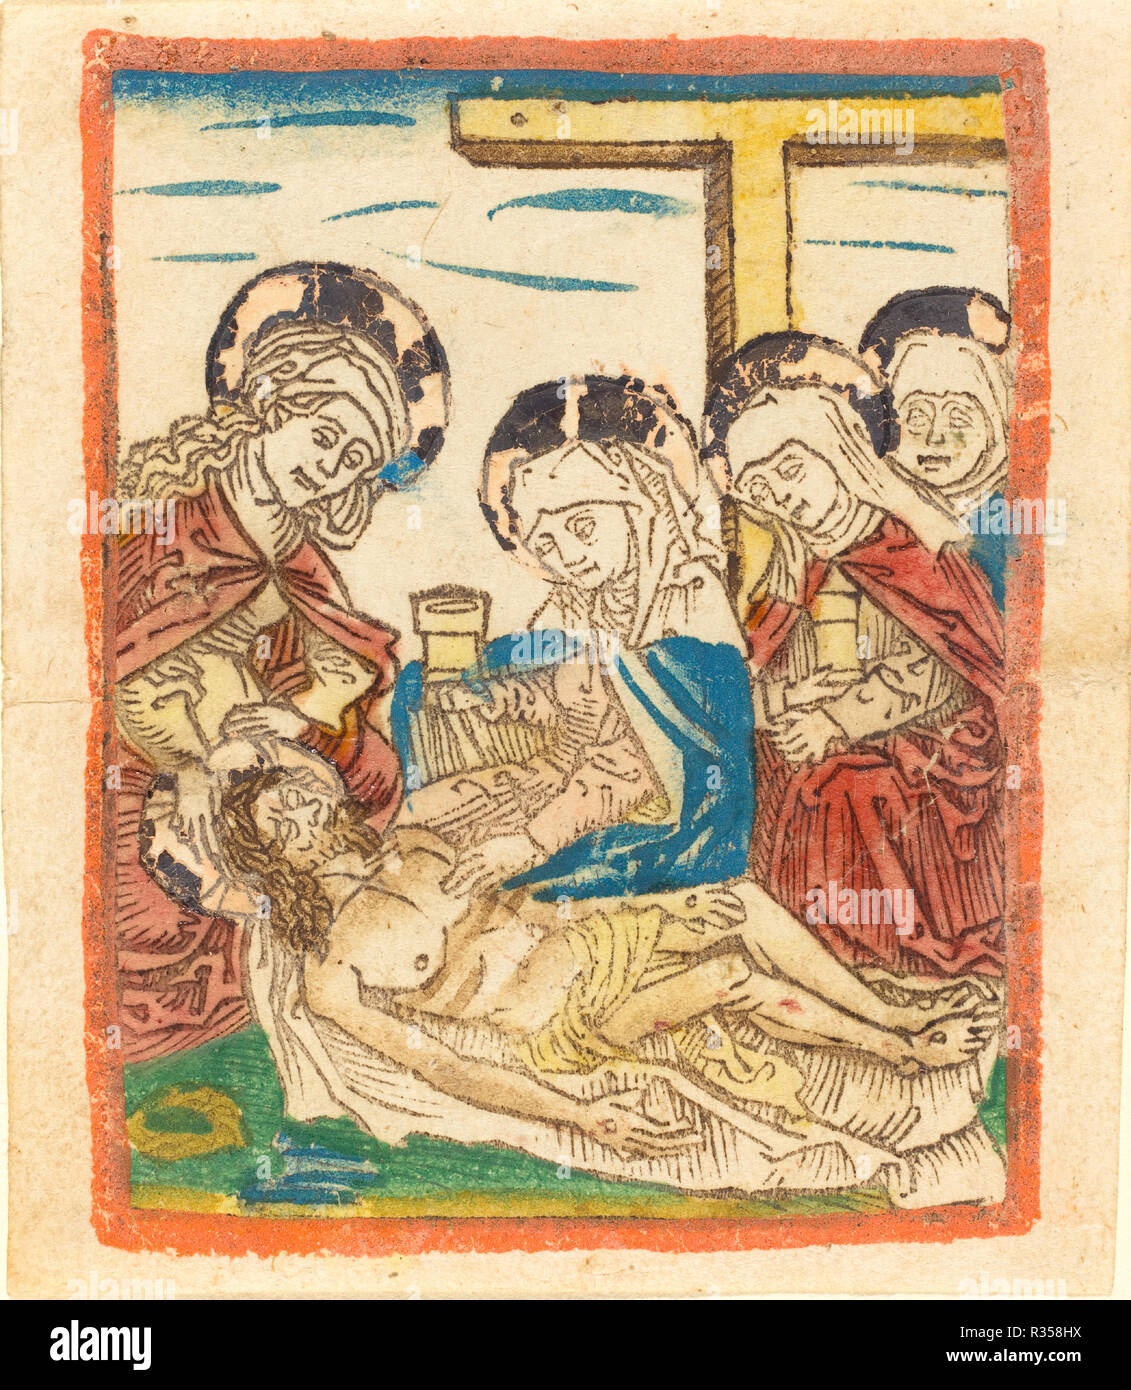 The Lamentation. Dated: c. 1480/1490. Medium: woodcut in dark brown, hand-colored in red-lake, blue, green, yellow, tan, gold, and orange. Museum: National Gallery of Art, Washington DC. Author: German 15th Century. Stock Photo